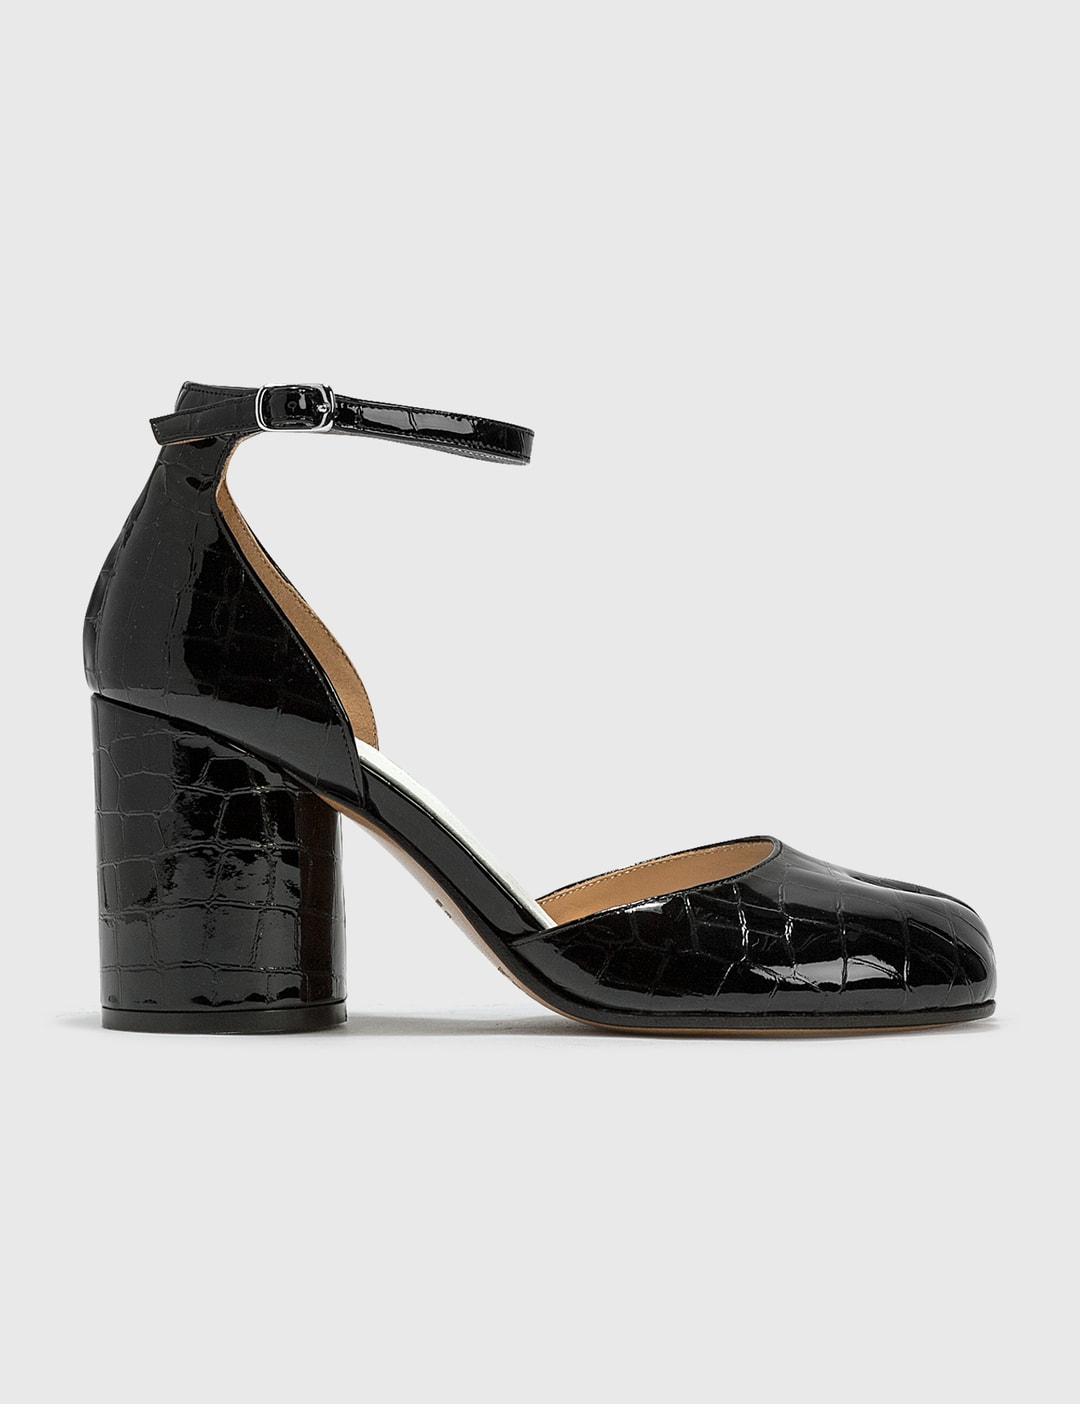 Maison Margiela - Tabi Embossed Croco Sandals | HBX - Globally Curated ...